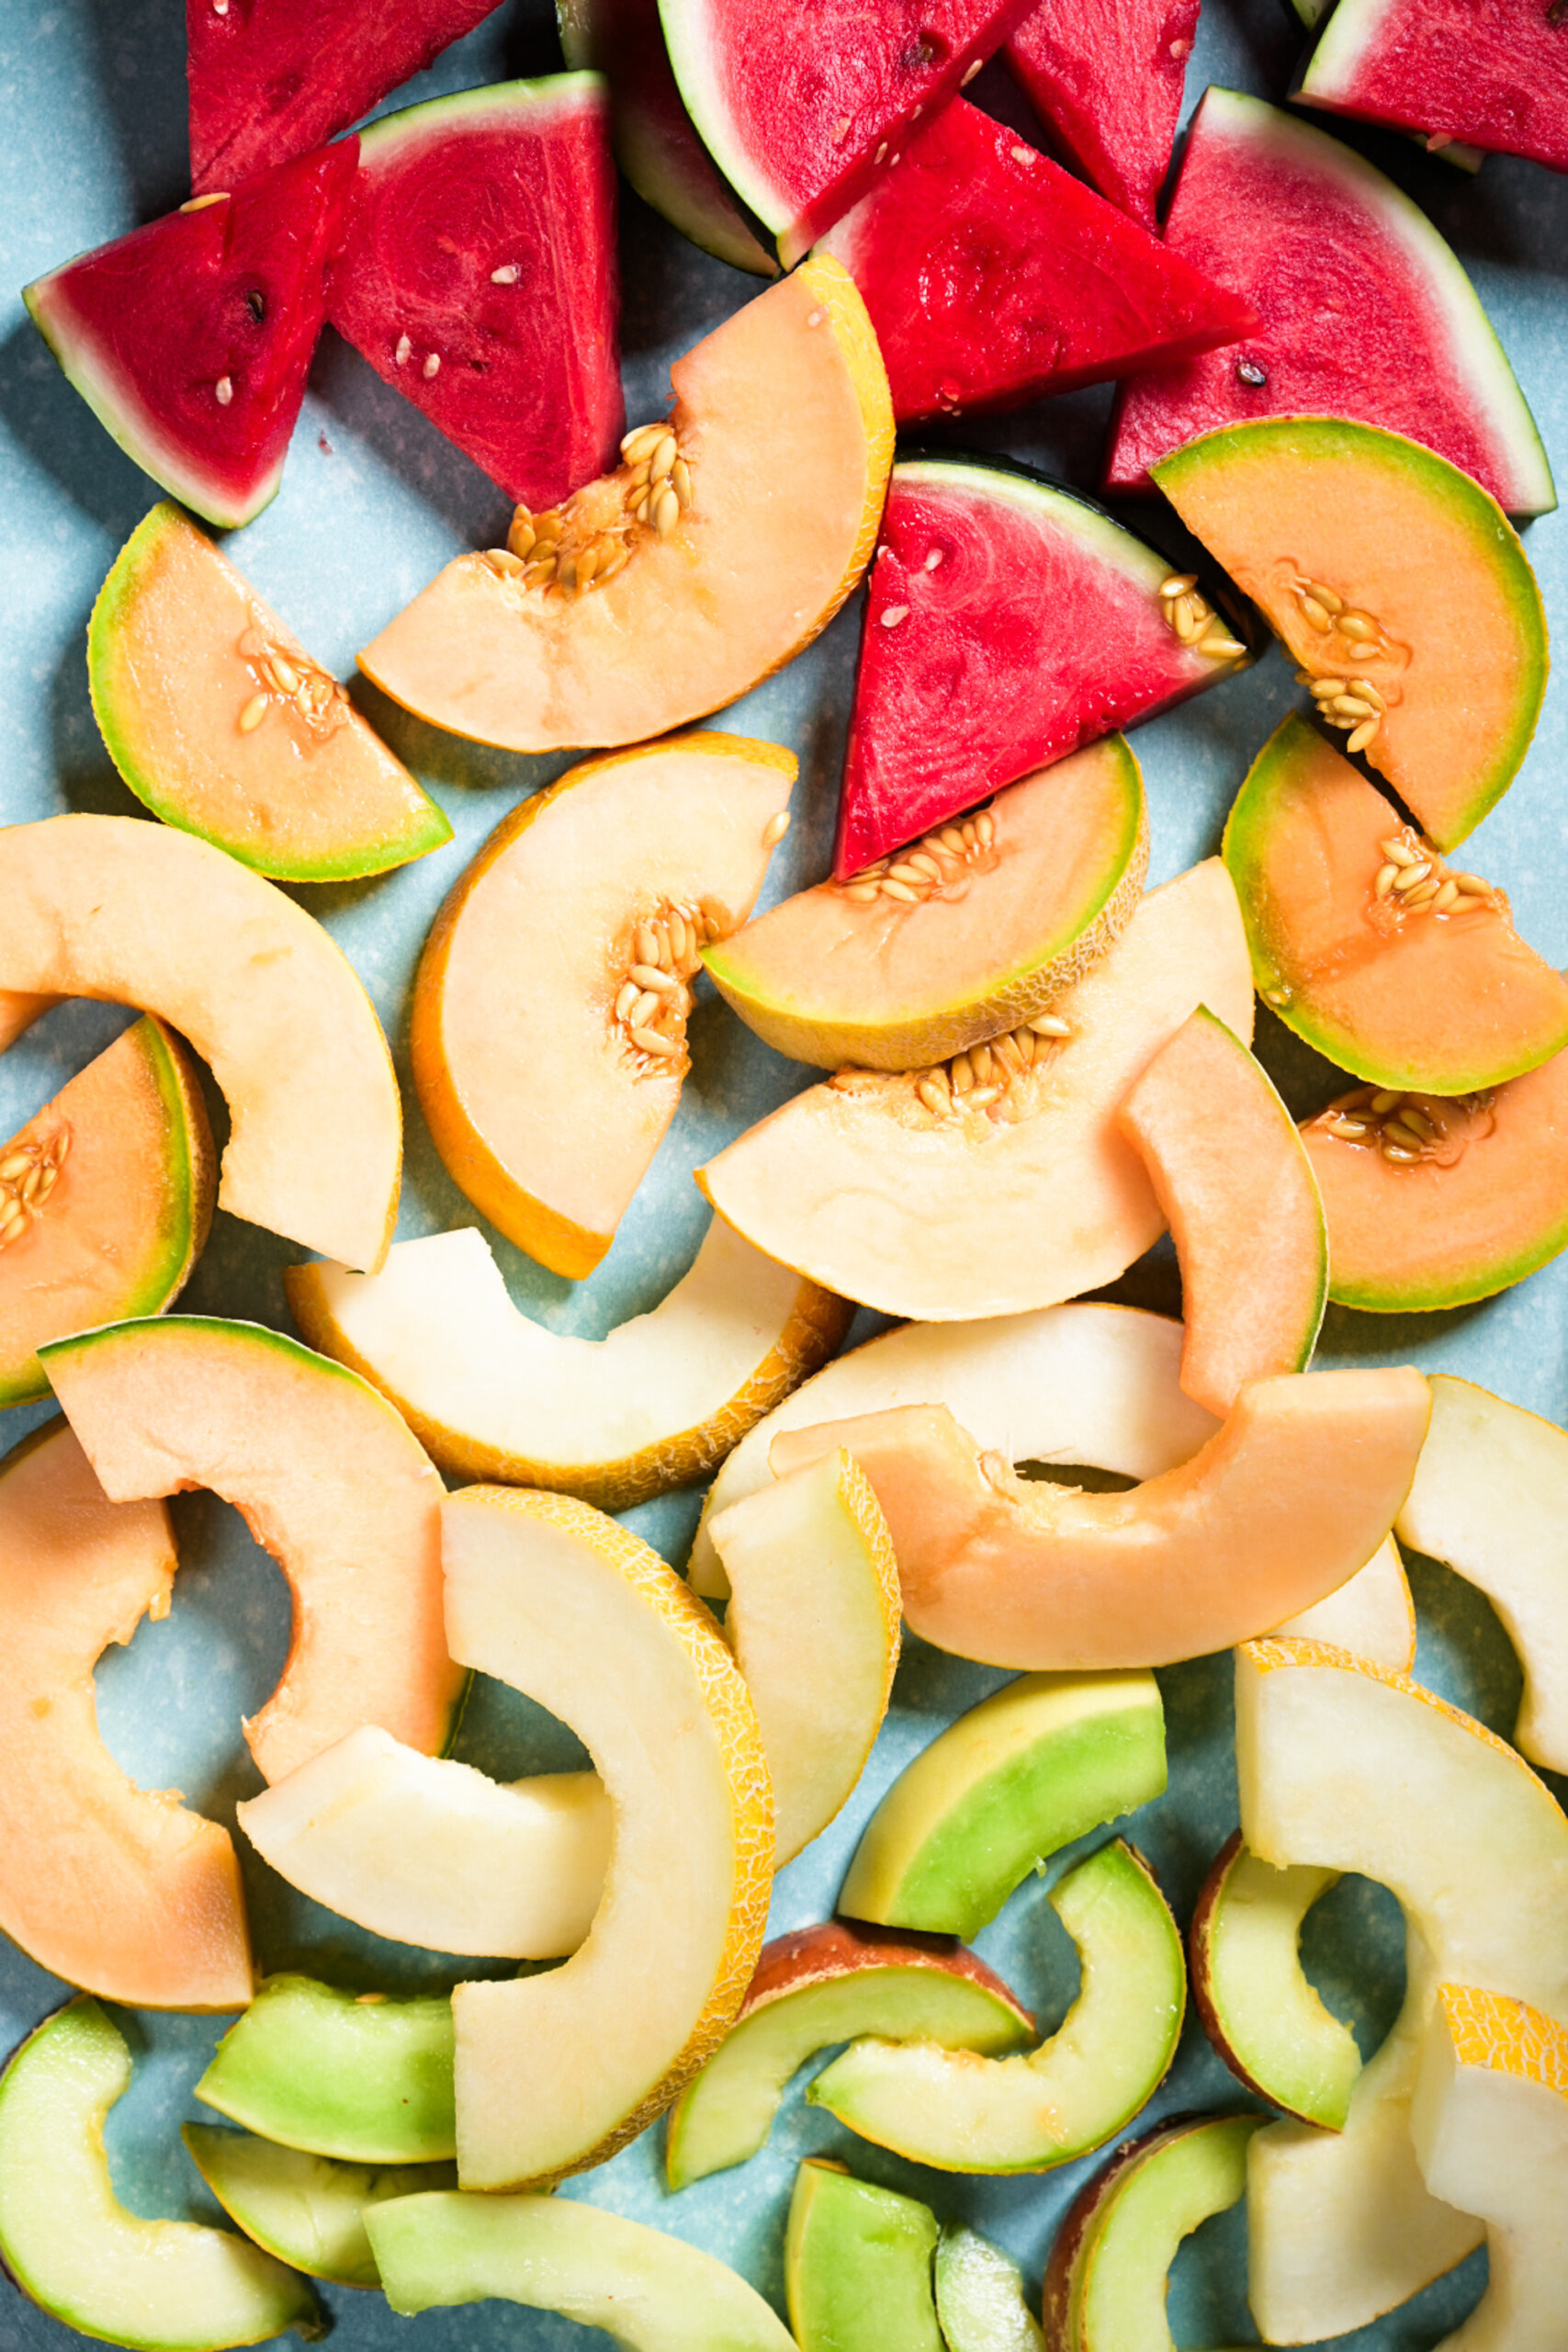 Slices of colorful melons create a vibrant summer gradient